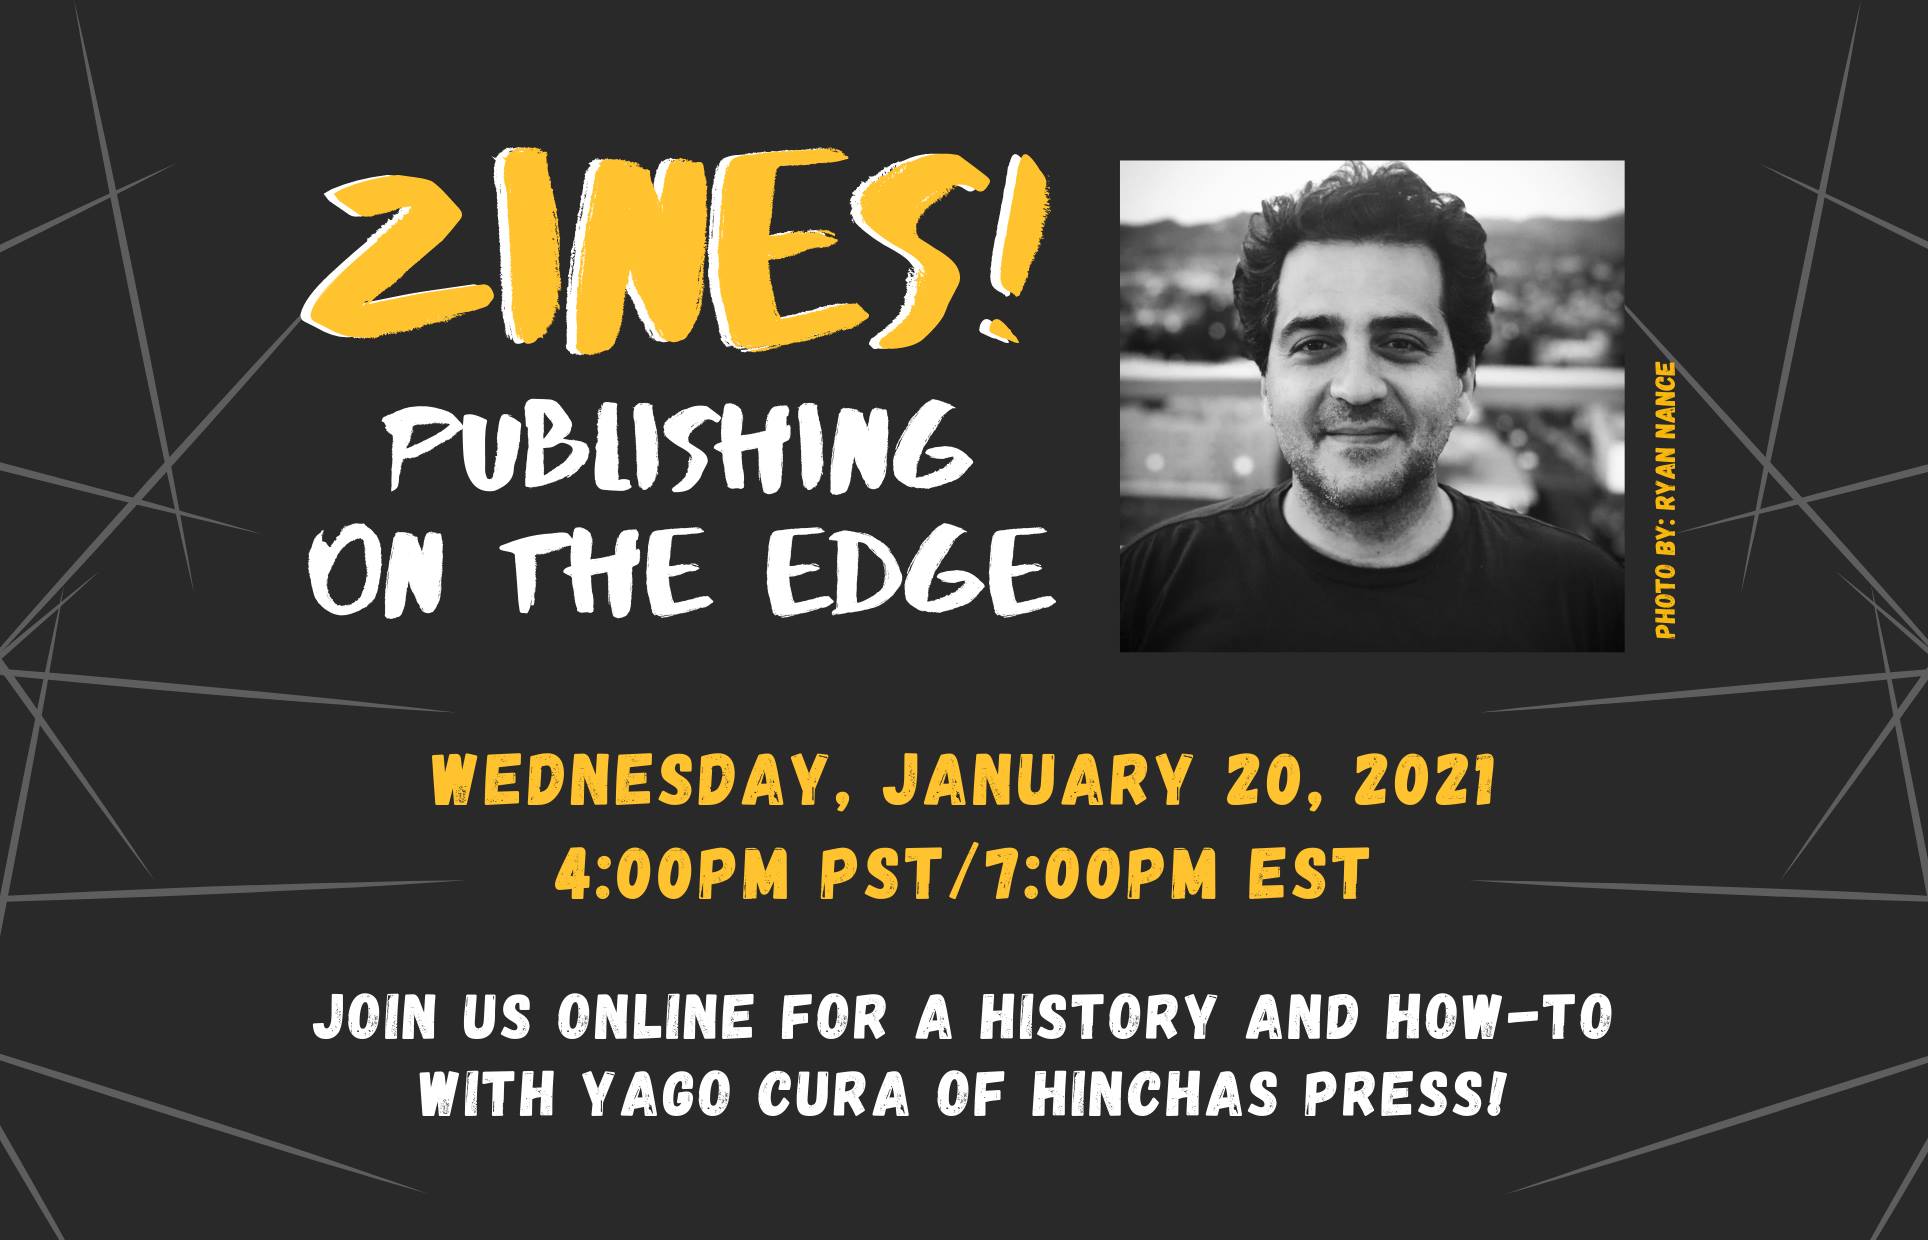 program title and photo of Yago Cura on a black and gray background